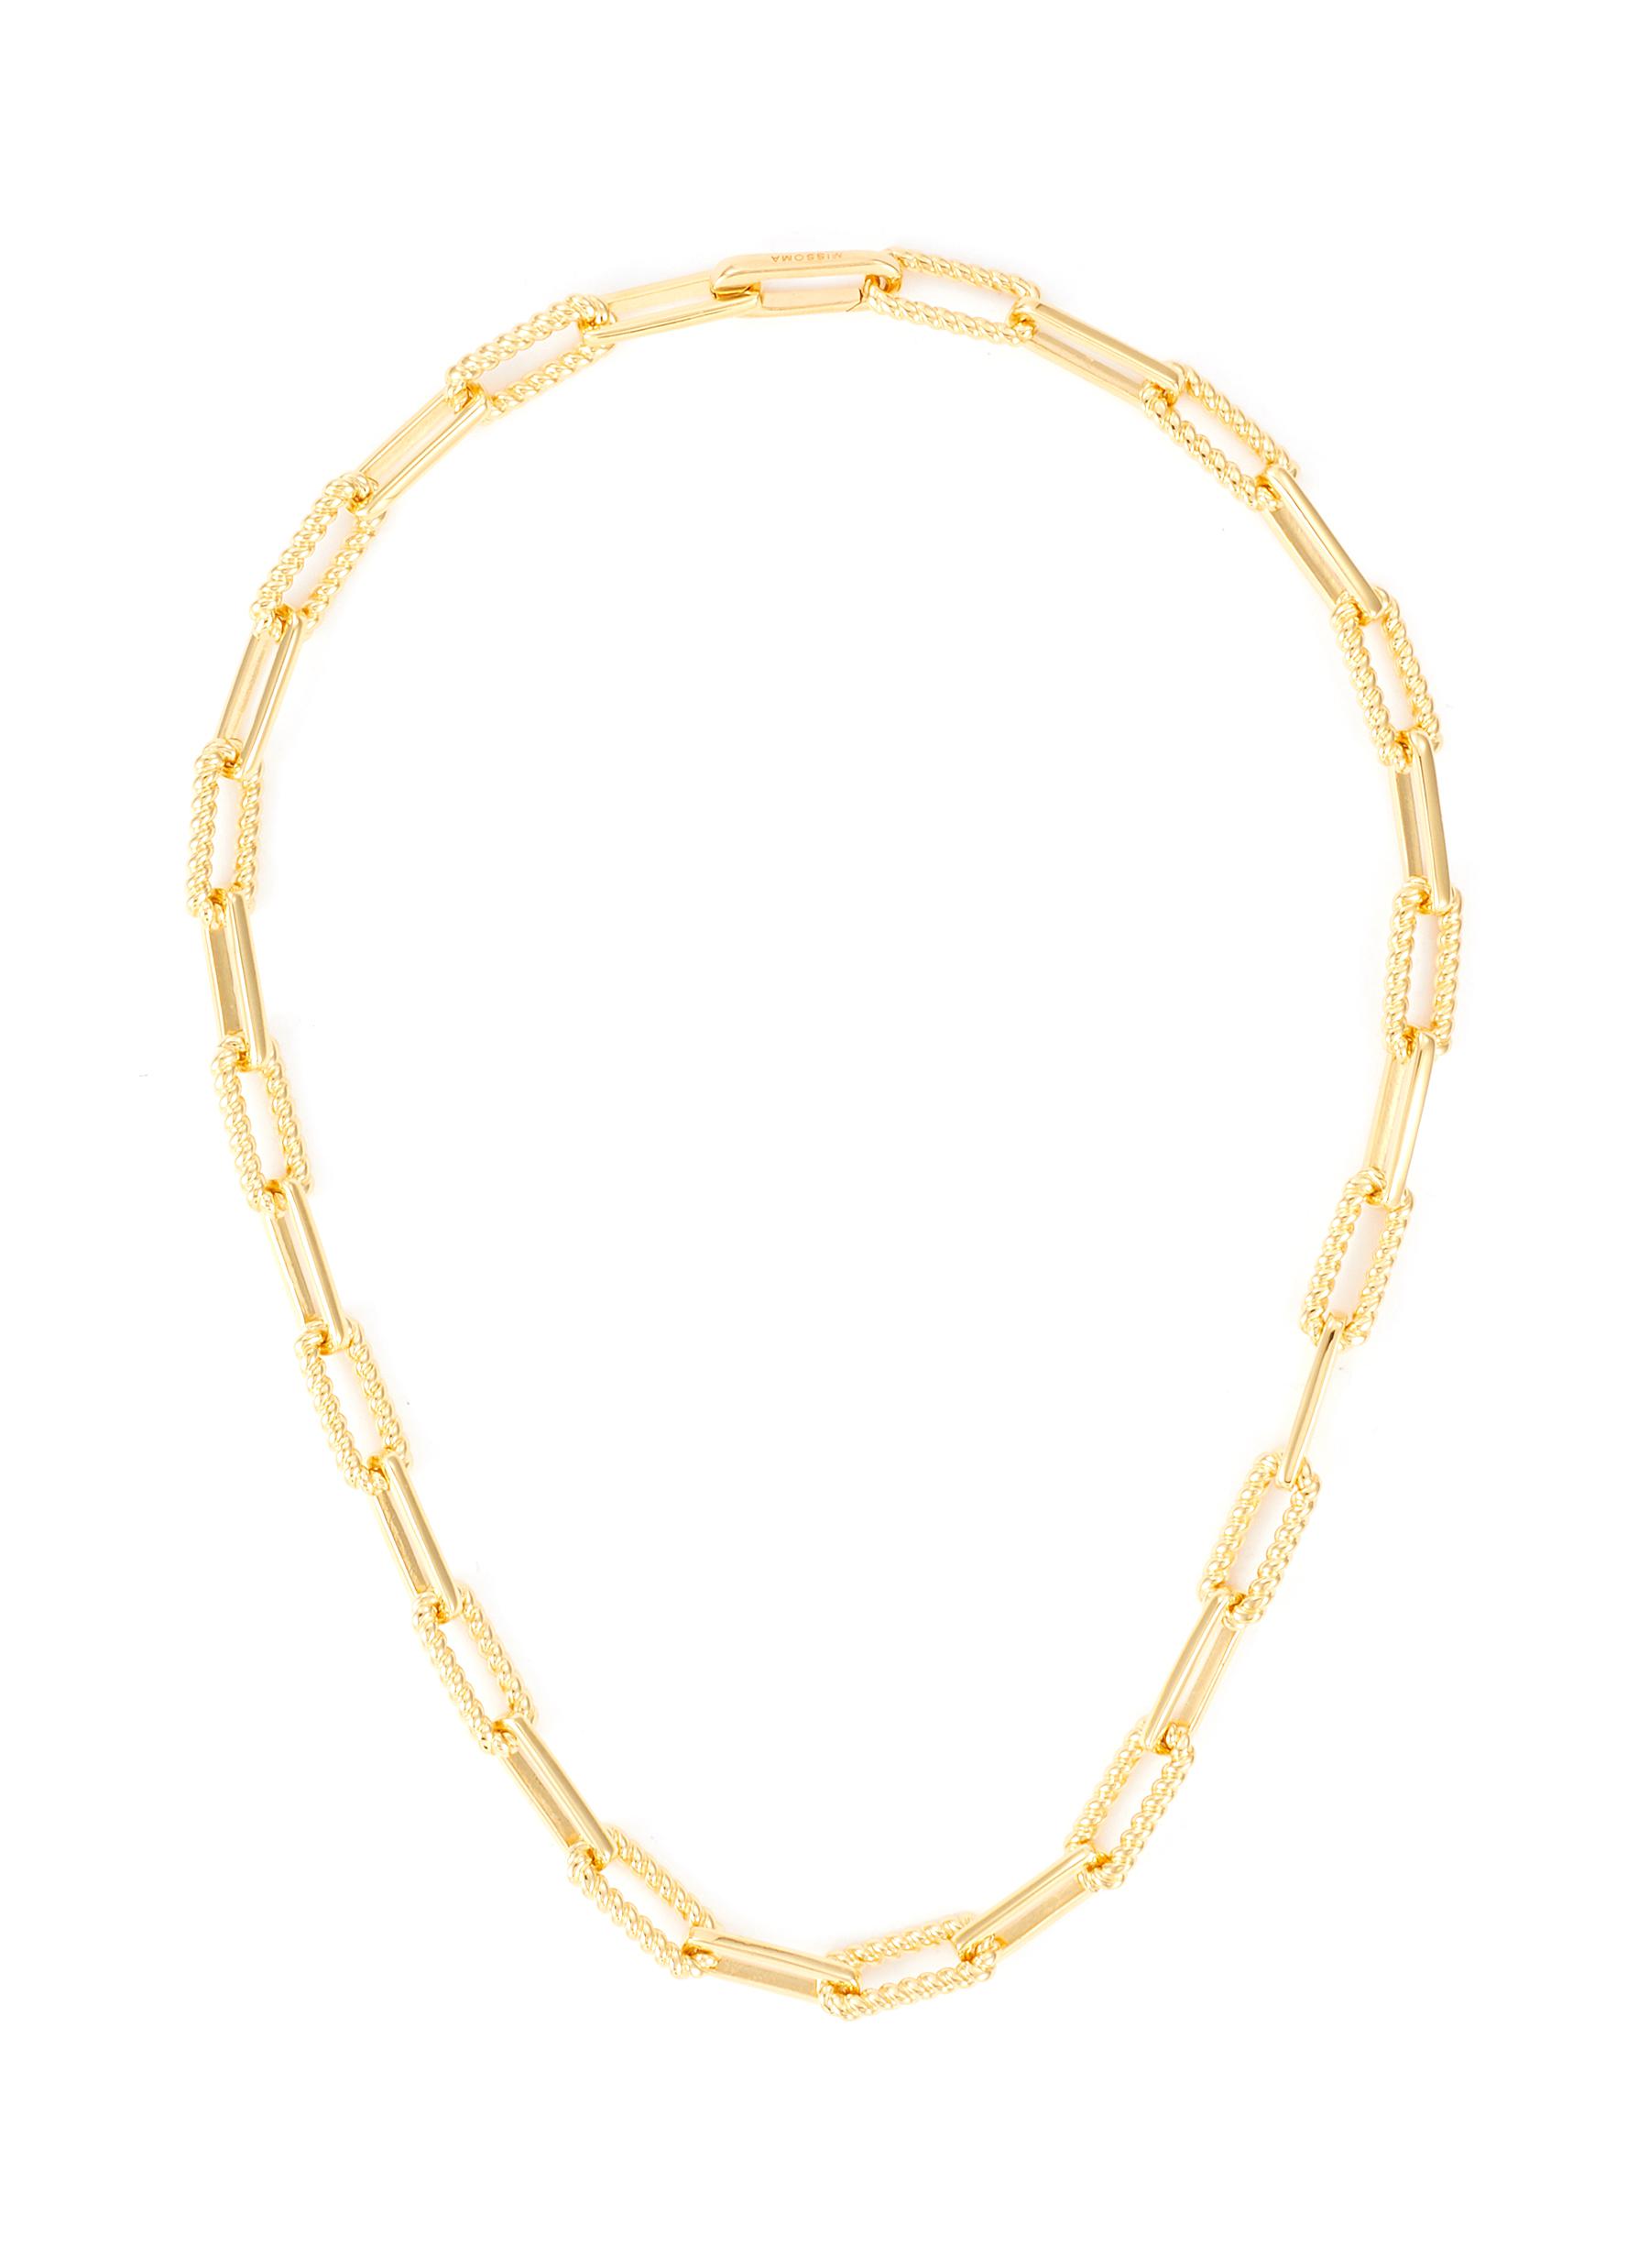 MISSOMA ‘TWISTED' COTERIE 18K GOLD PLATED CHAIN NECKLACE